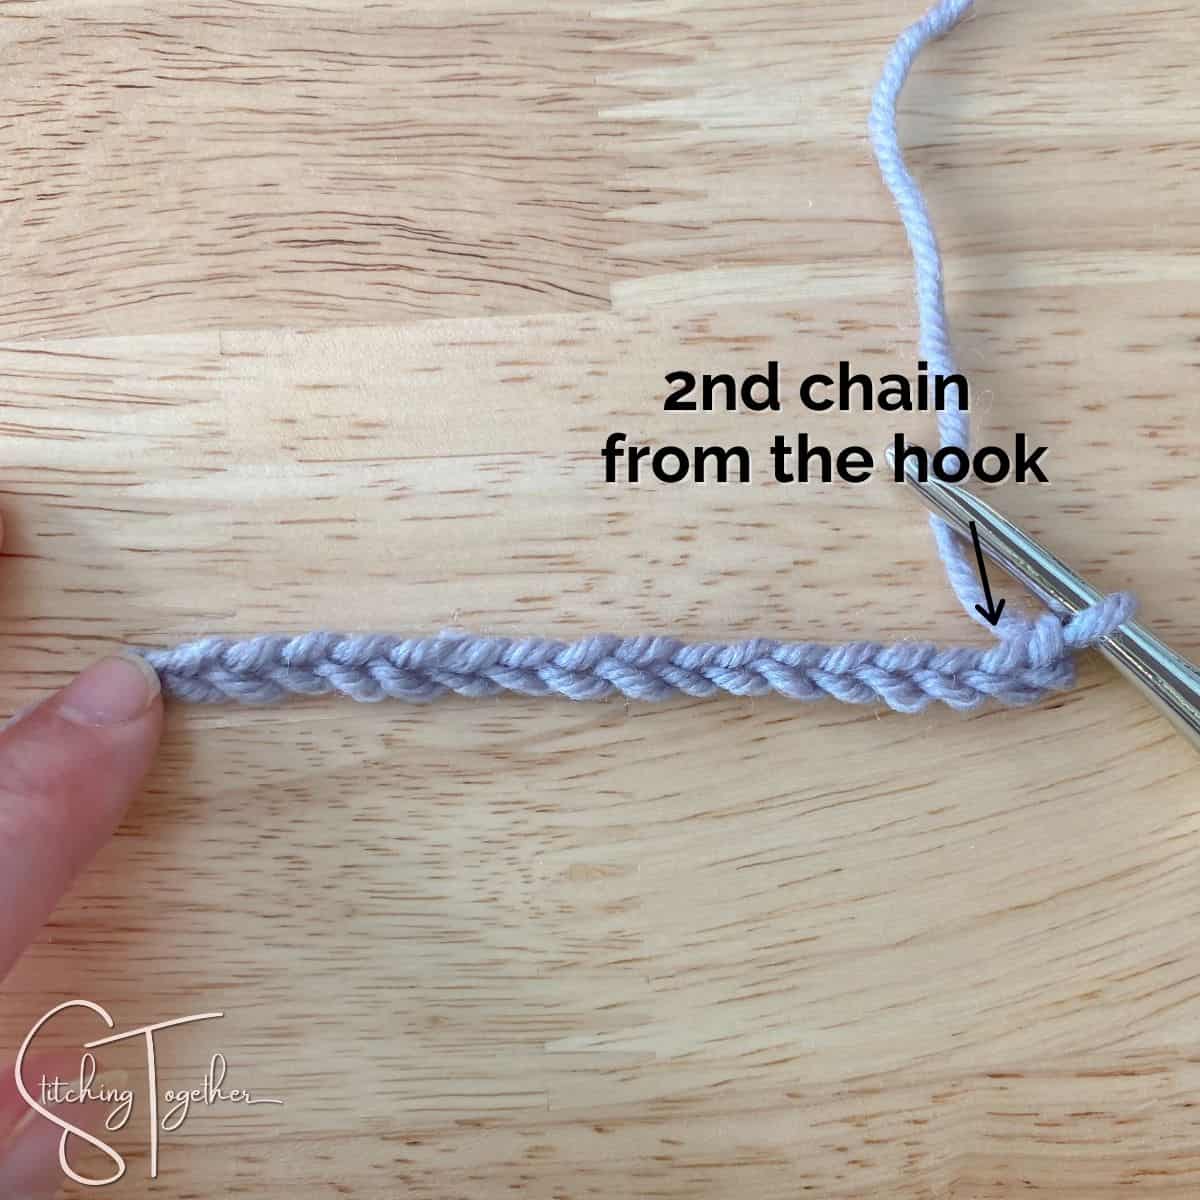 crochet chain with words and an arrow showing the second chain from the hook